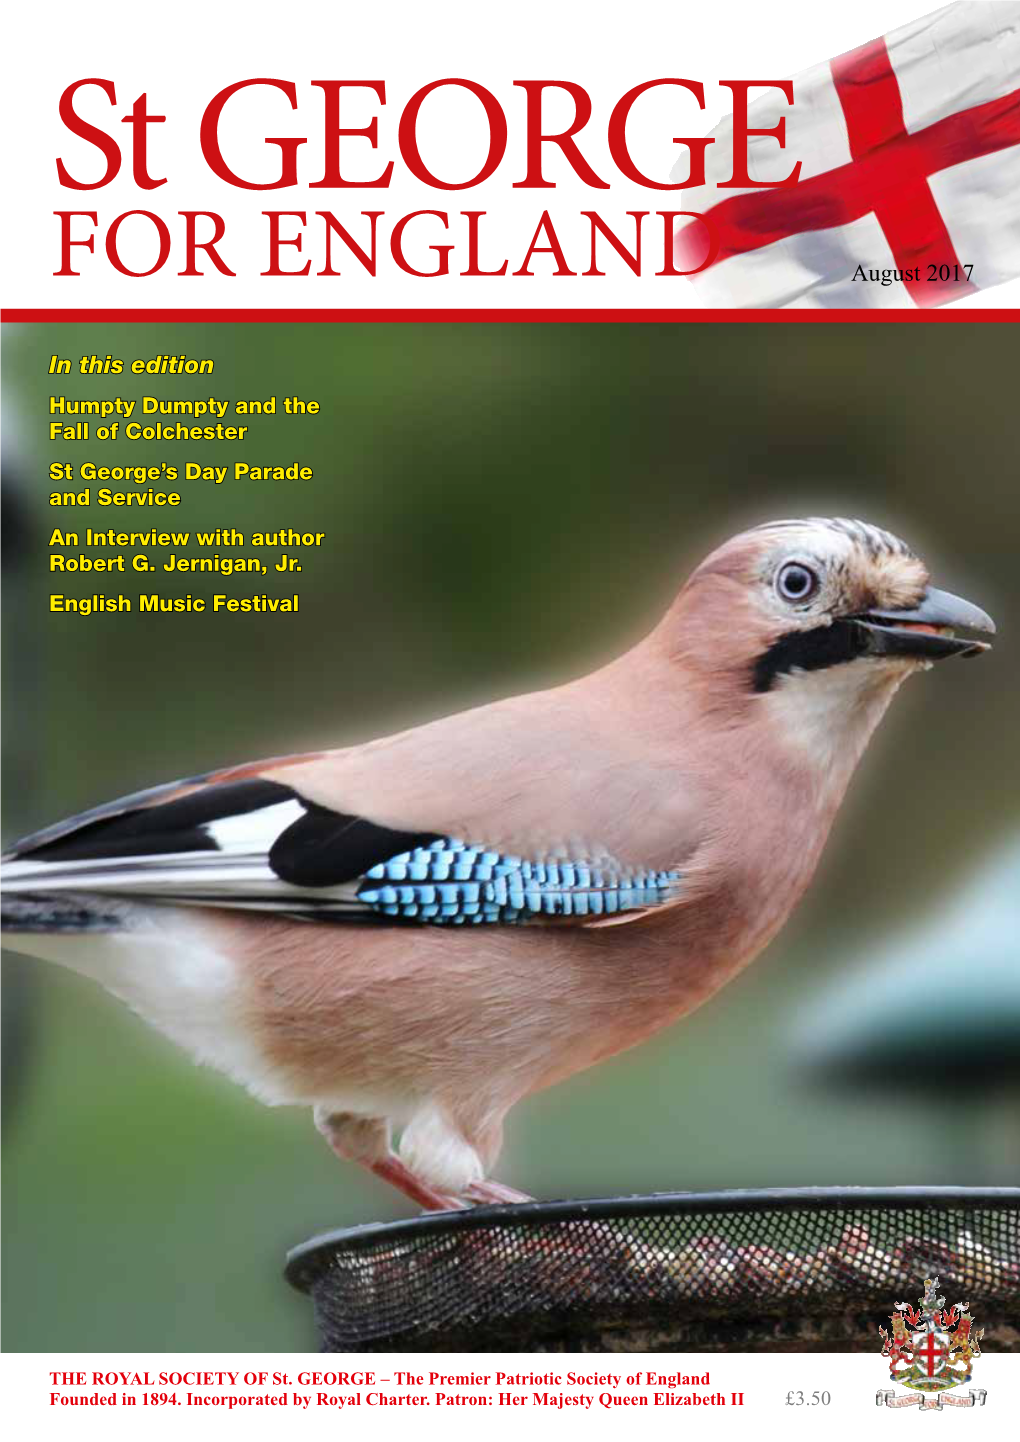 FOR ENGLAND August 2017